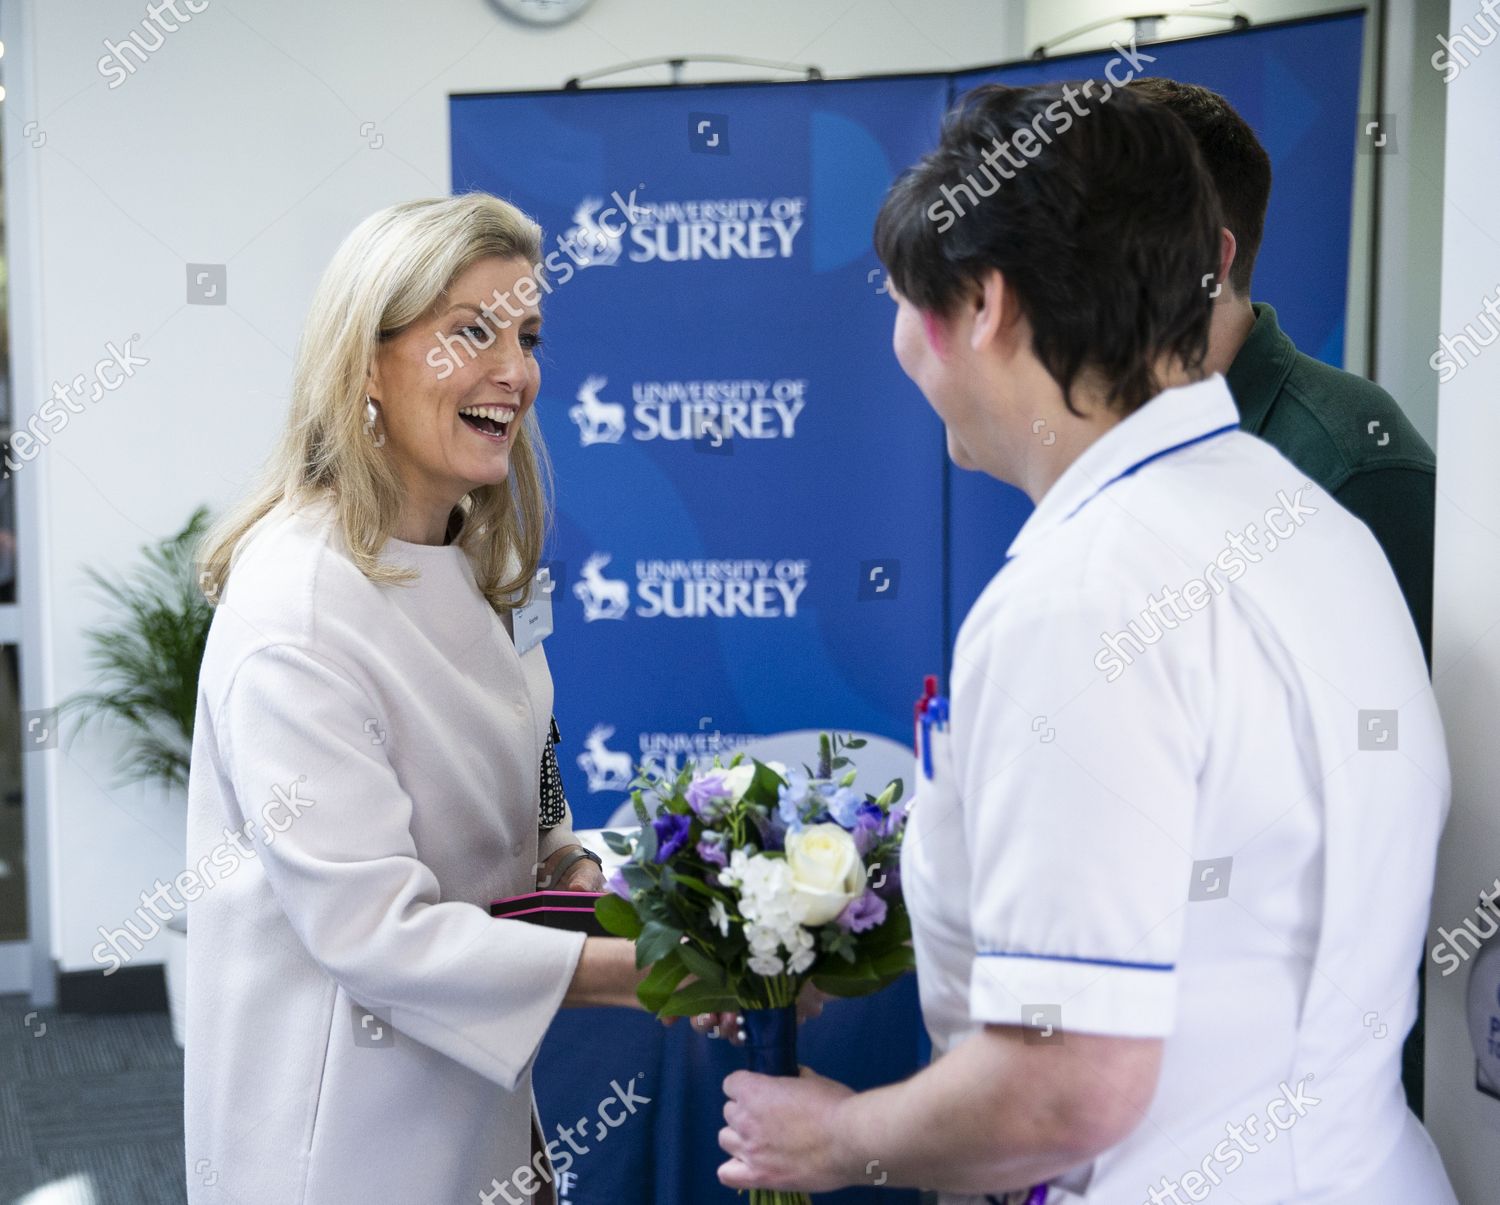 CASA REAL BRITÁNICA - Página 14 Sophie-countess-of-wessex-opens-new-health-sciences-institute-university-of-surrey-guildford-uk-shutterstock-editorial-10542421af